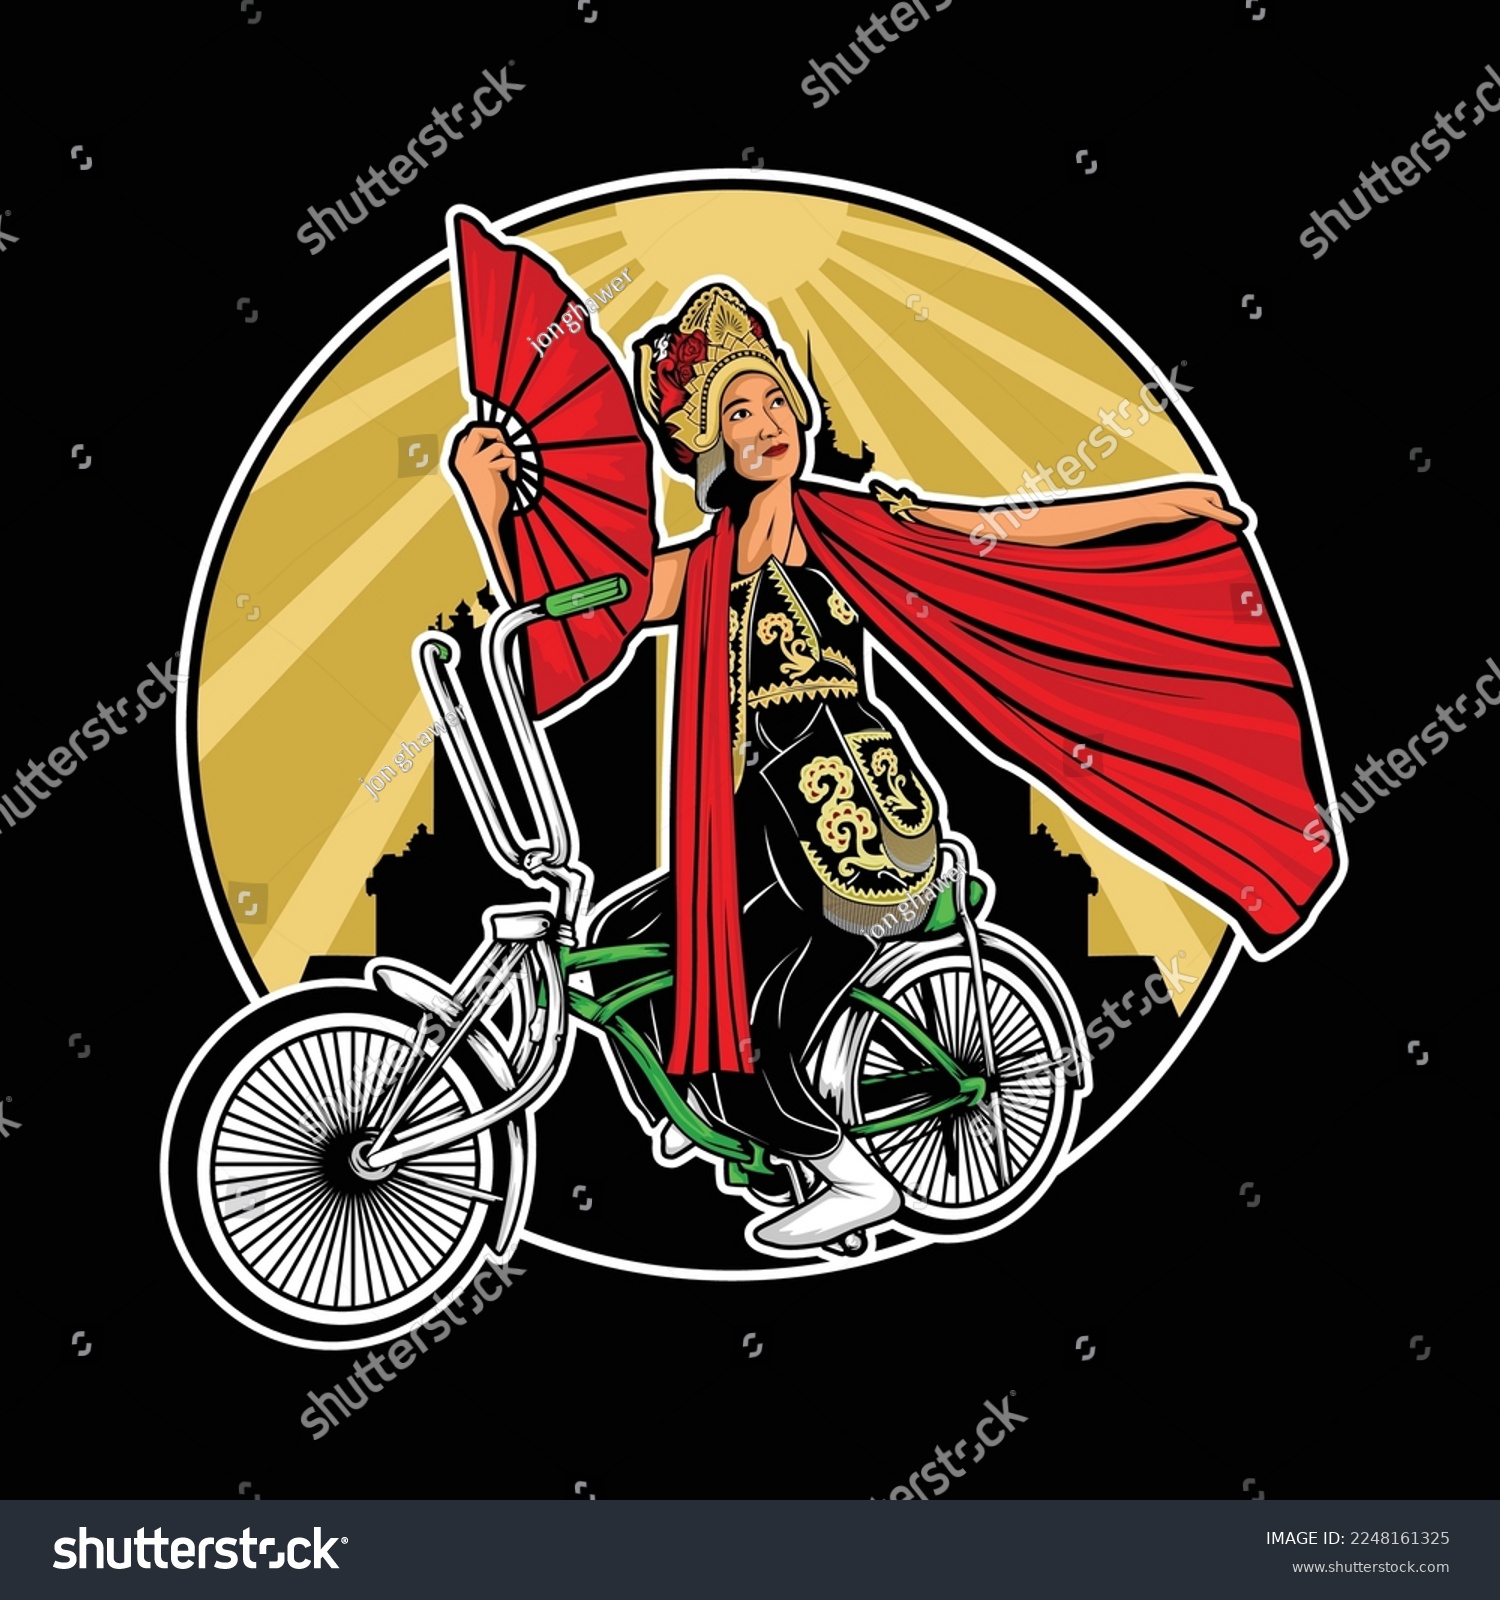 SVG of woman dancing traditional on a lowrider bike free download svg